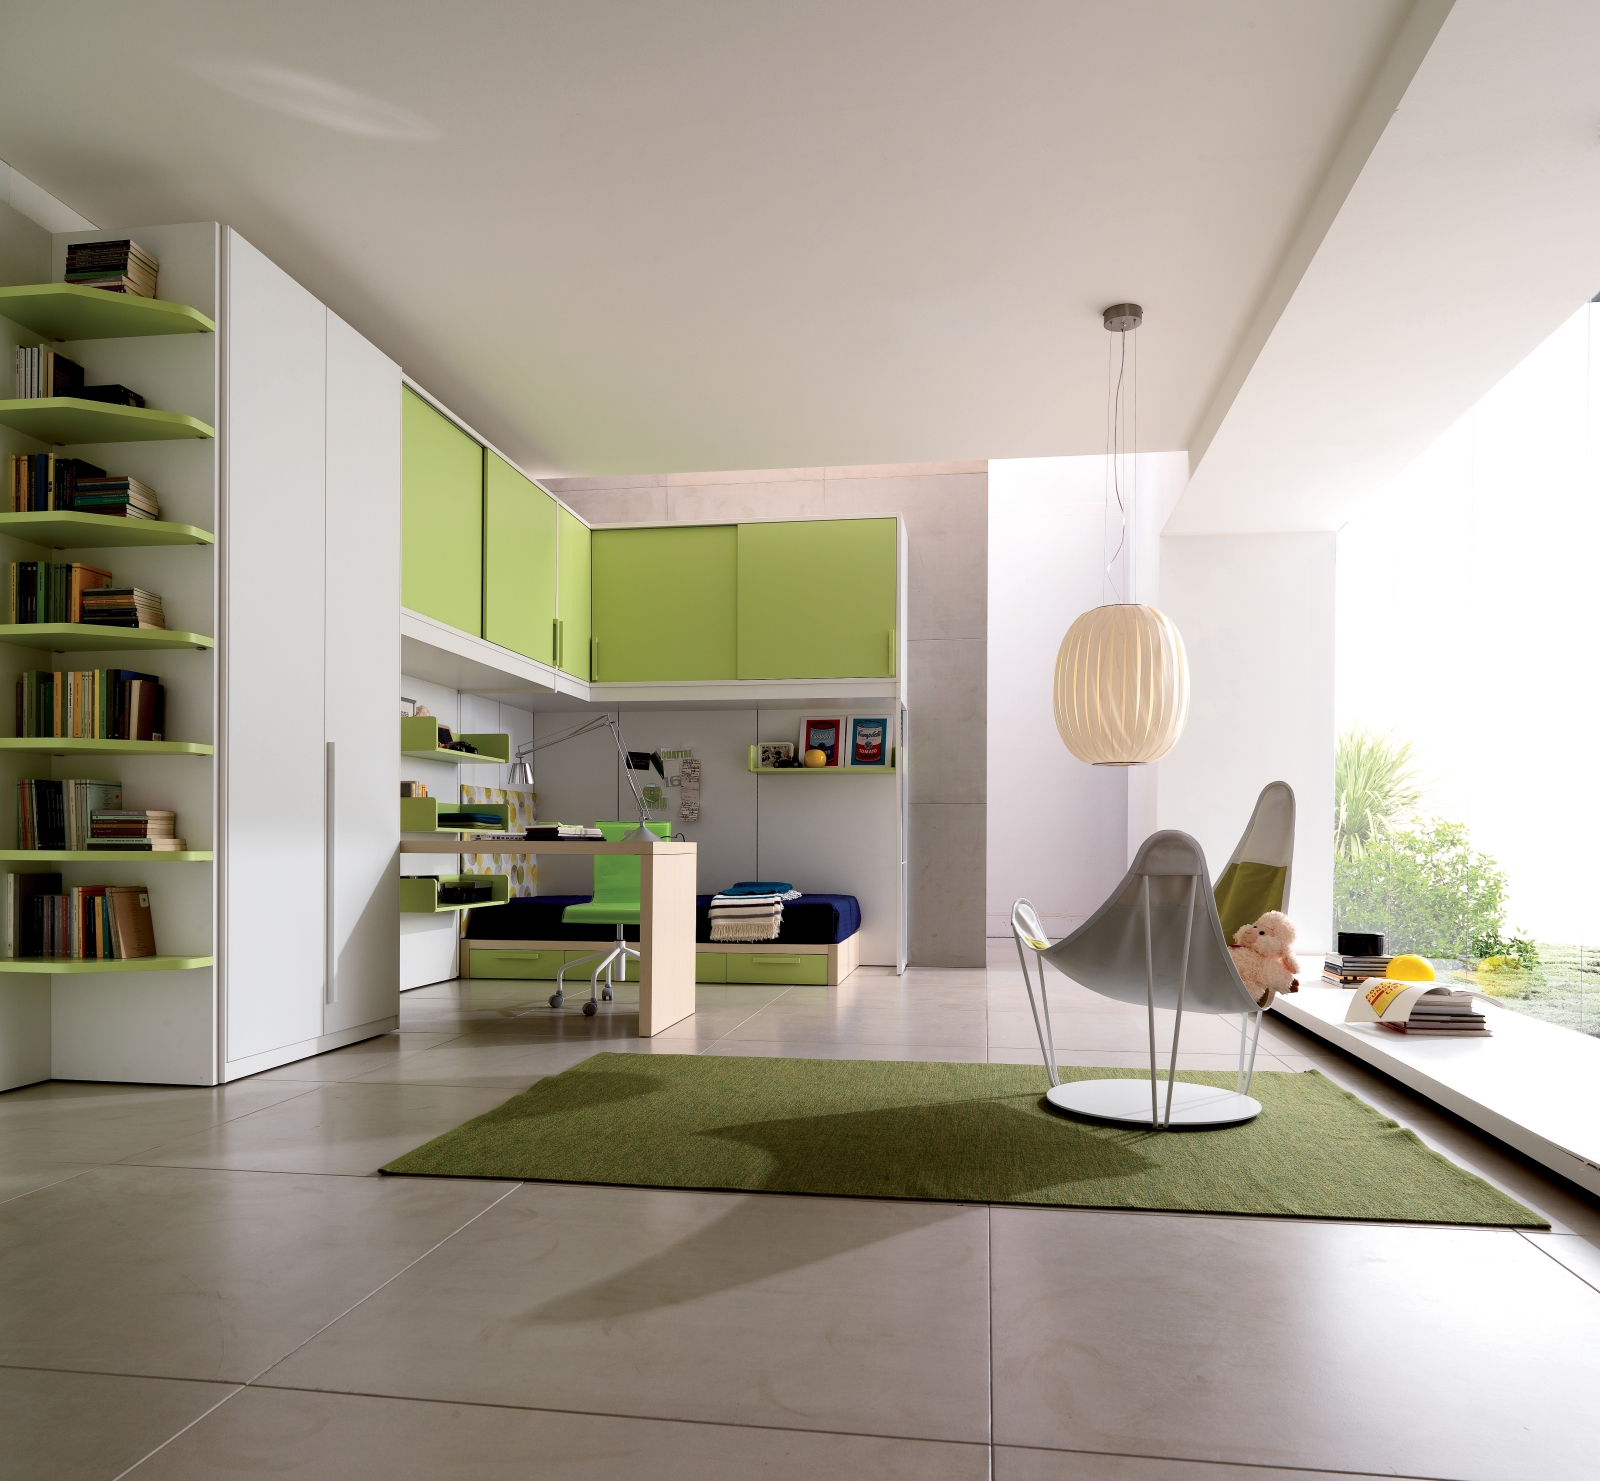 Decoration ideas for youth rooms "width =" 1600 "height =" 1481 "srcset =" https://mileray.com/wp-content/uploads/2020/05/1588510314_764_Bright-Color-Theme-For-Teens-Room-Decorating-Ideas-by-Zalf.jpg 1600w, https://mileray.com/ wp- content / uploads / 2016/07 / Zalf4-300x278.jpg 300w, https://mileray.com/wp-content/uploads/2016/07/Zalf4-768x711.jpg 768w, https://mileray.com/ wp- content / uploads / 2016/07 / Zalf4-1024x948.jpg 1024w, https://mileray.com/wp-content/uploads/2016/07/Zalf4-696x644.jpg 696w, https://mileray.com/ wp- content / uploads / 2016/07 / Zalf4-1068x989.jpg 1068w, https://mileray.com/wp-content/uploads/2016/07/Zalf4-454x420.jpg 454w "sizes =" (maximum width: 1600px) 100vw , 1600px